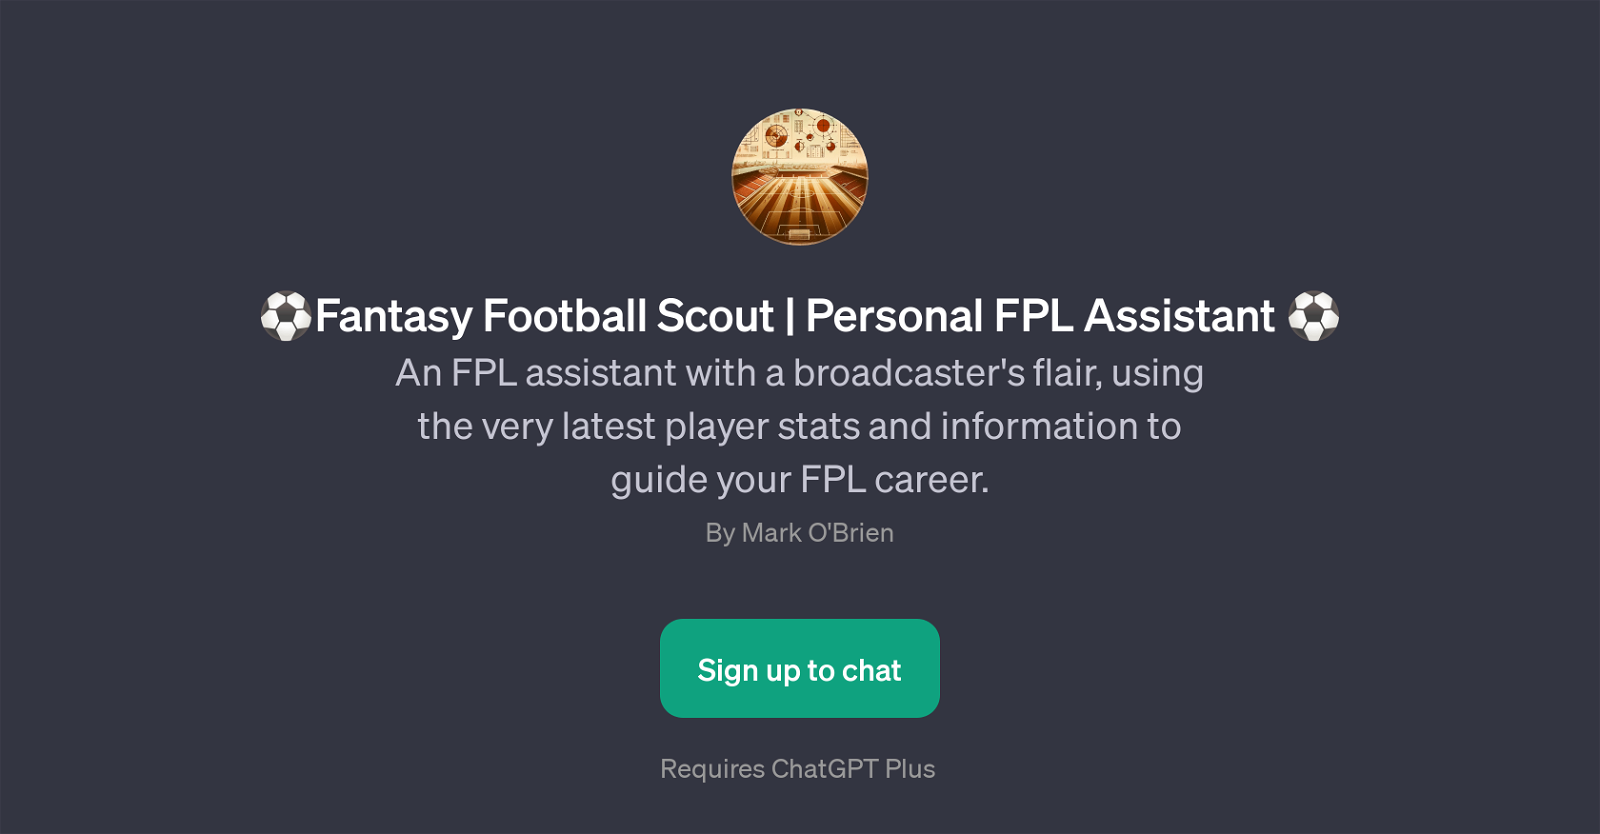 Fantasy Football Scout | Personal FPL Assistant website